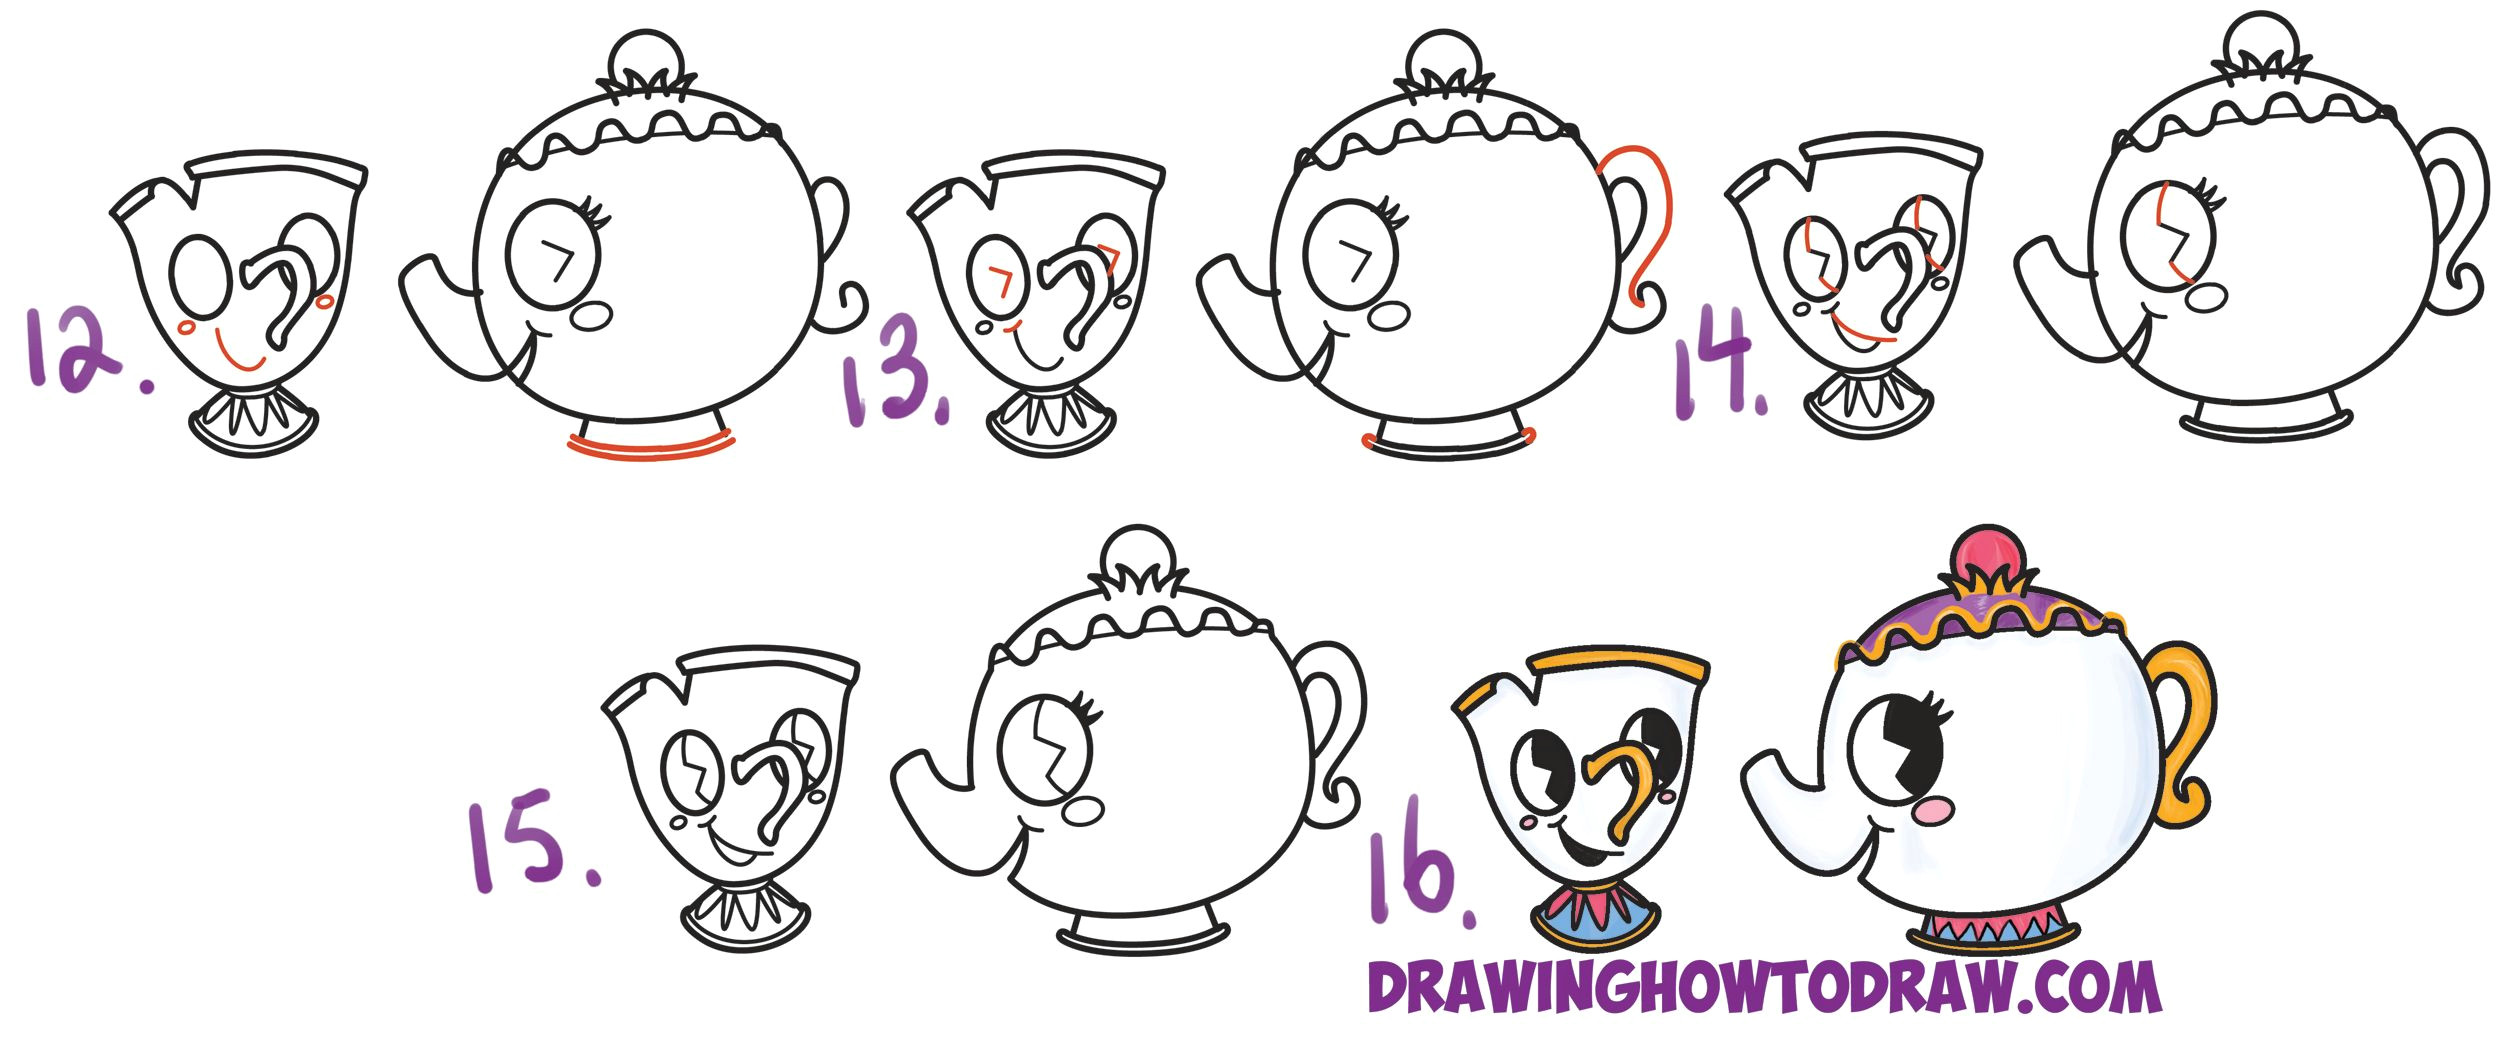 Easy Drawing for toddlers How to Draw Cute Kawaii Chibi Mrs Potts and Chip From Beauty and